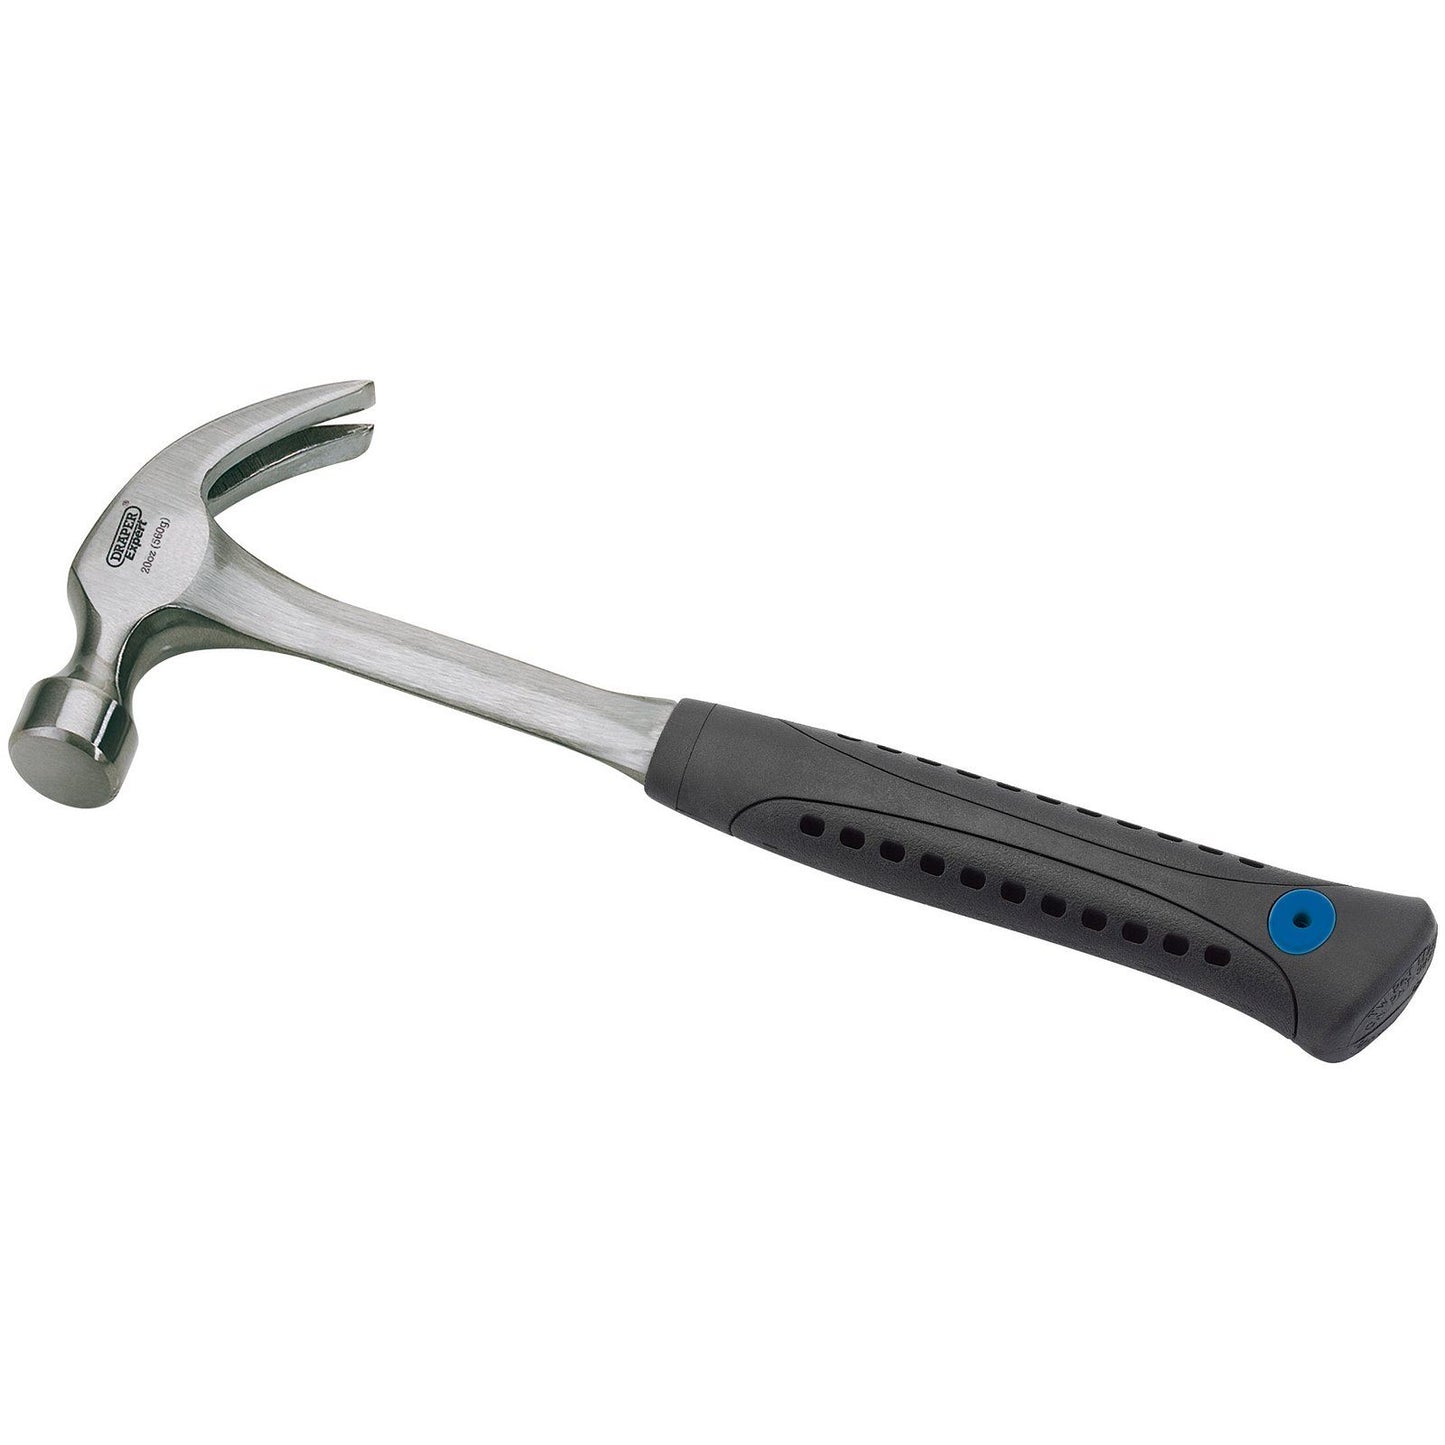 Draper 1x Expert 560G 20oz Solid Forged Claw Hammer Professional Tool 21284